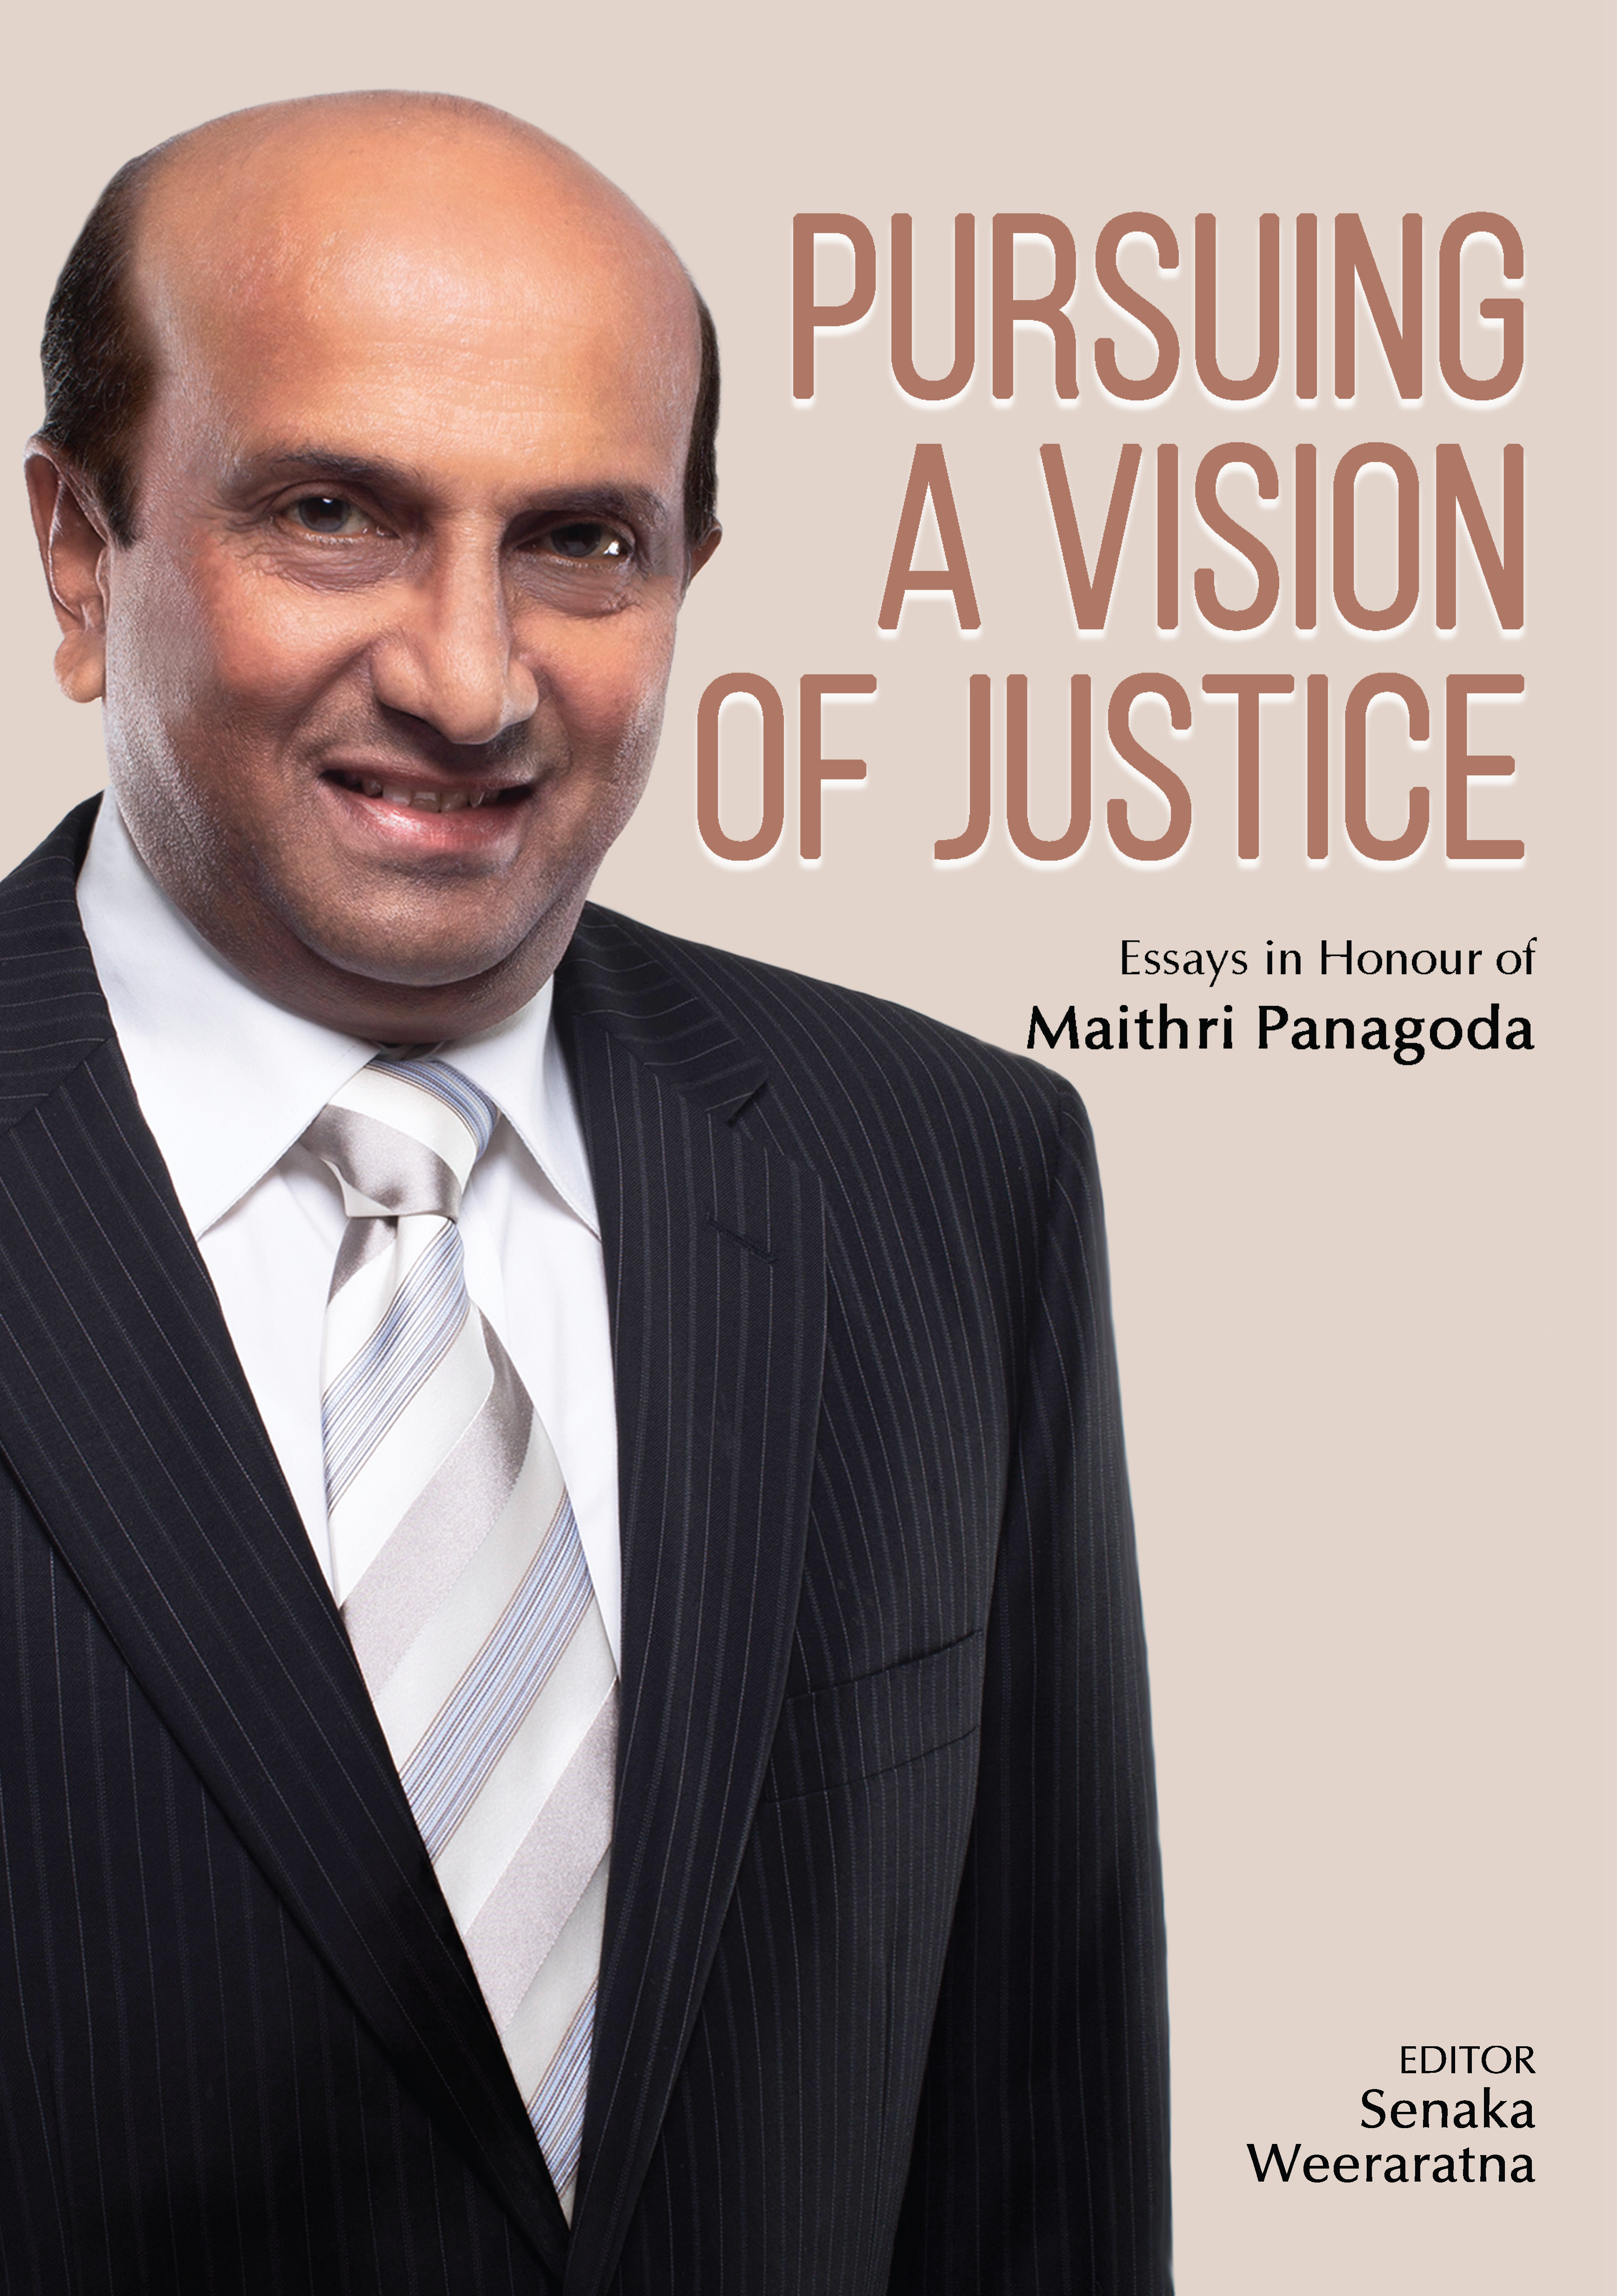 Pursuing A Vision OF Justice